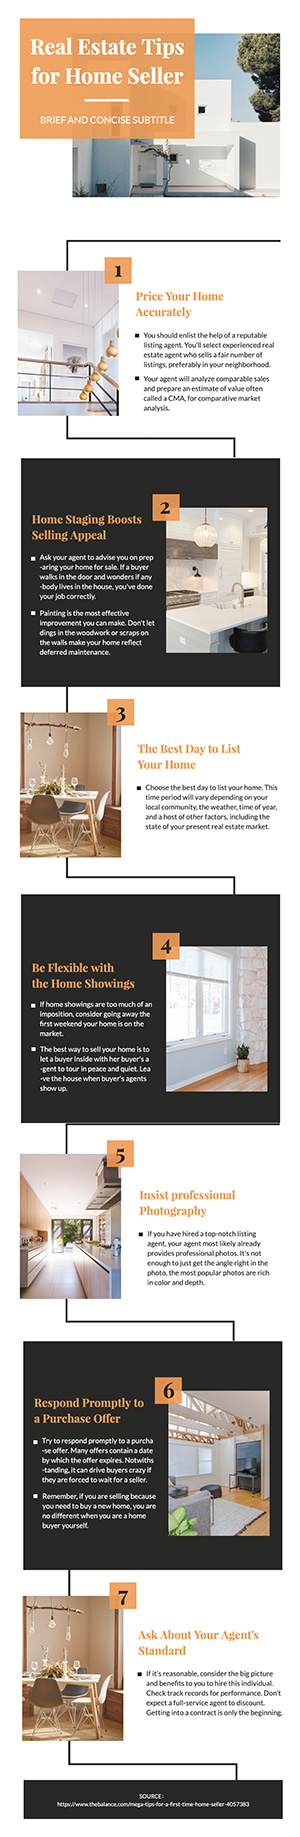 Real Estate Tips Infographic Design